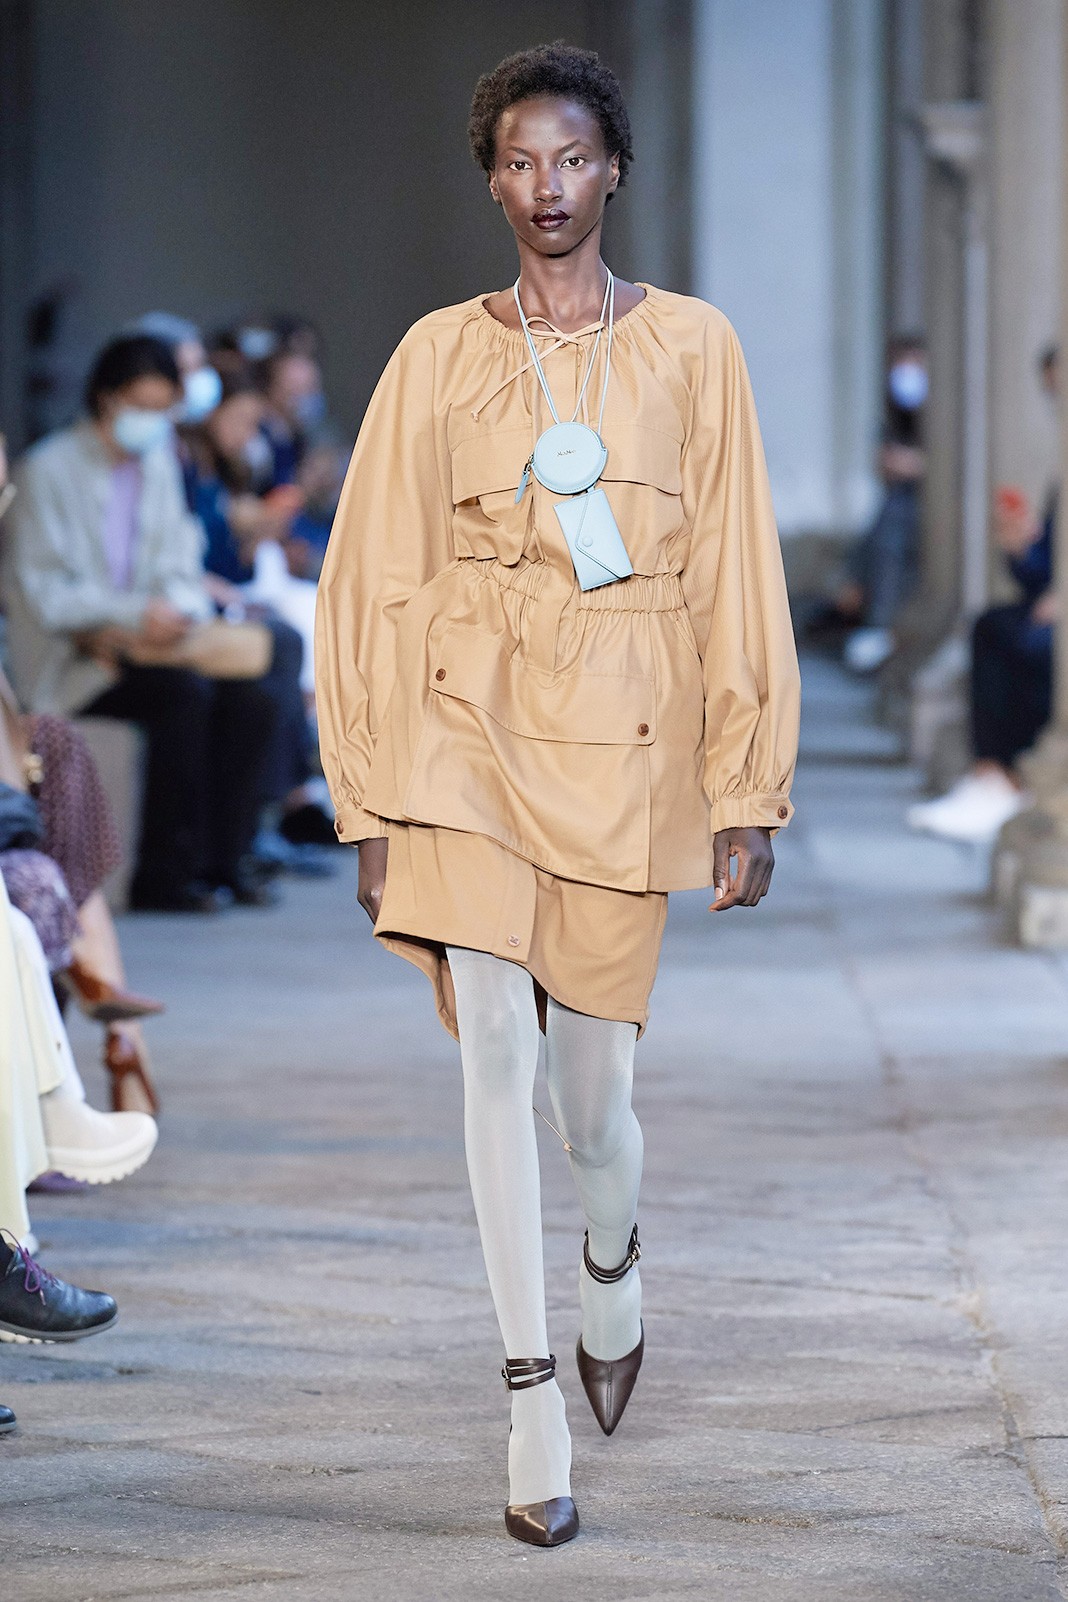 Max Mara Spring/Summer 2021 Ready-to-Wear Collection